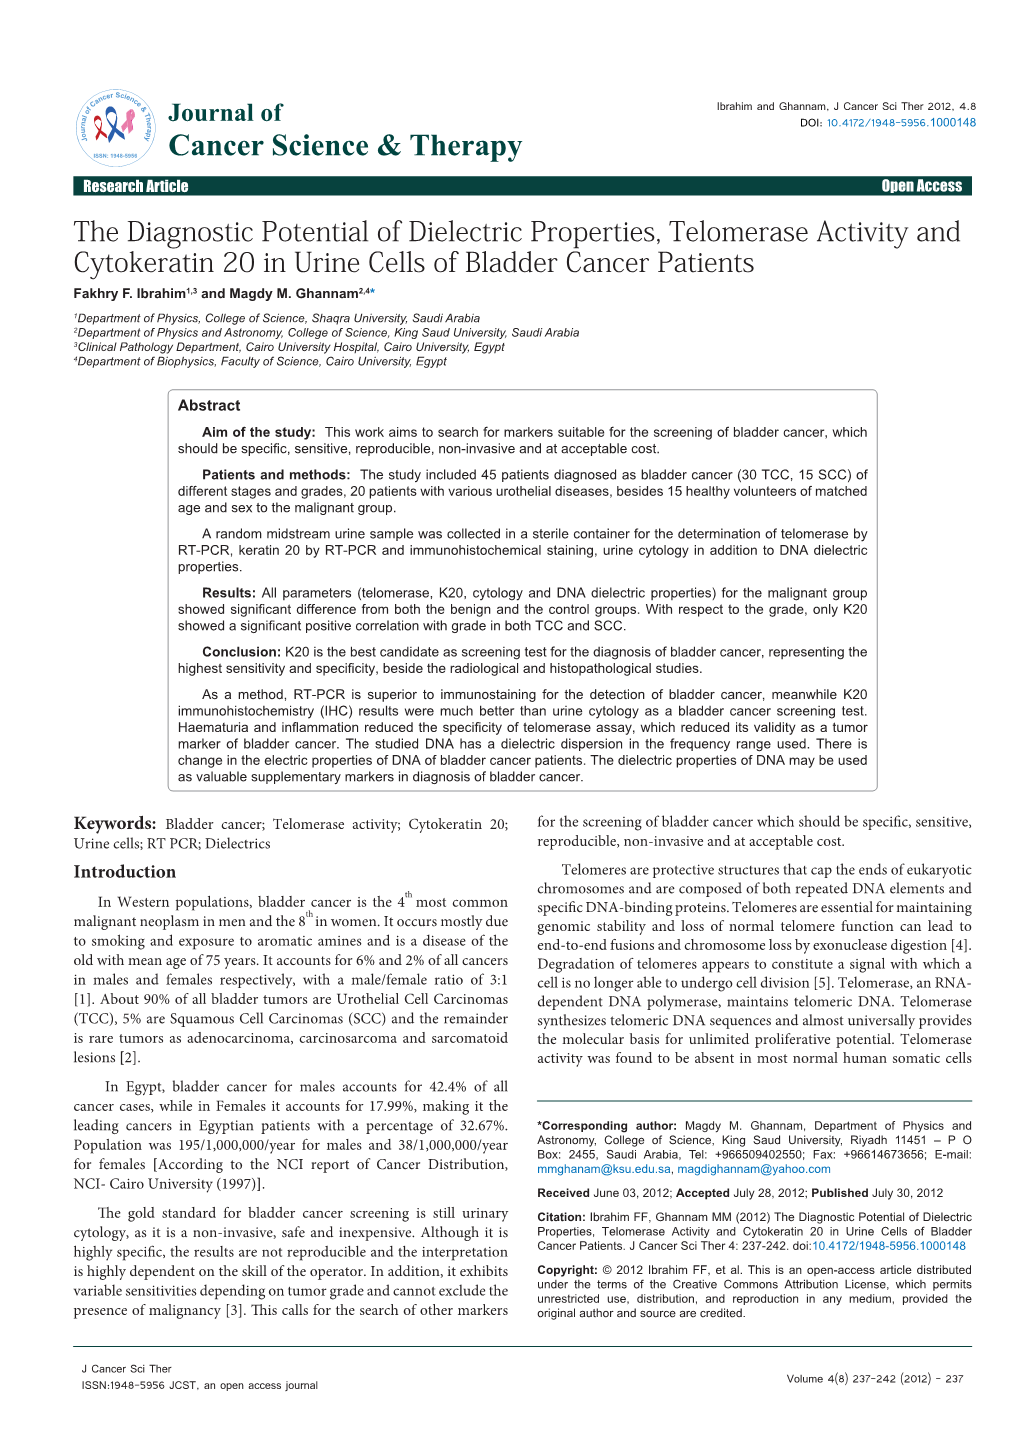 The Diagnostic Potential of Dielectric Properties, Telomerase Activity and Cytokeratin 20 in Urine Cells of Bladder Cancer Patients Fakhry F